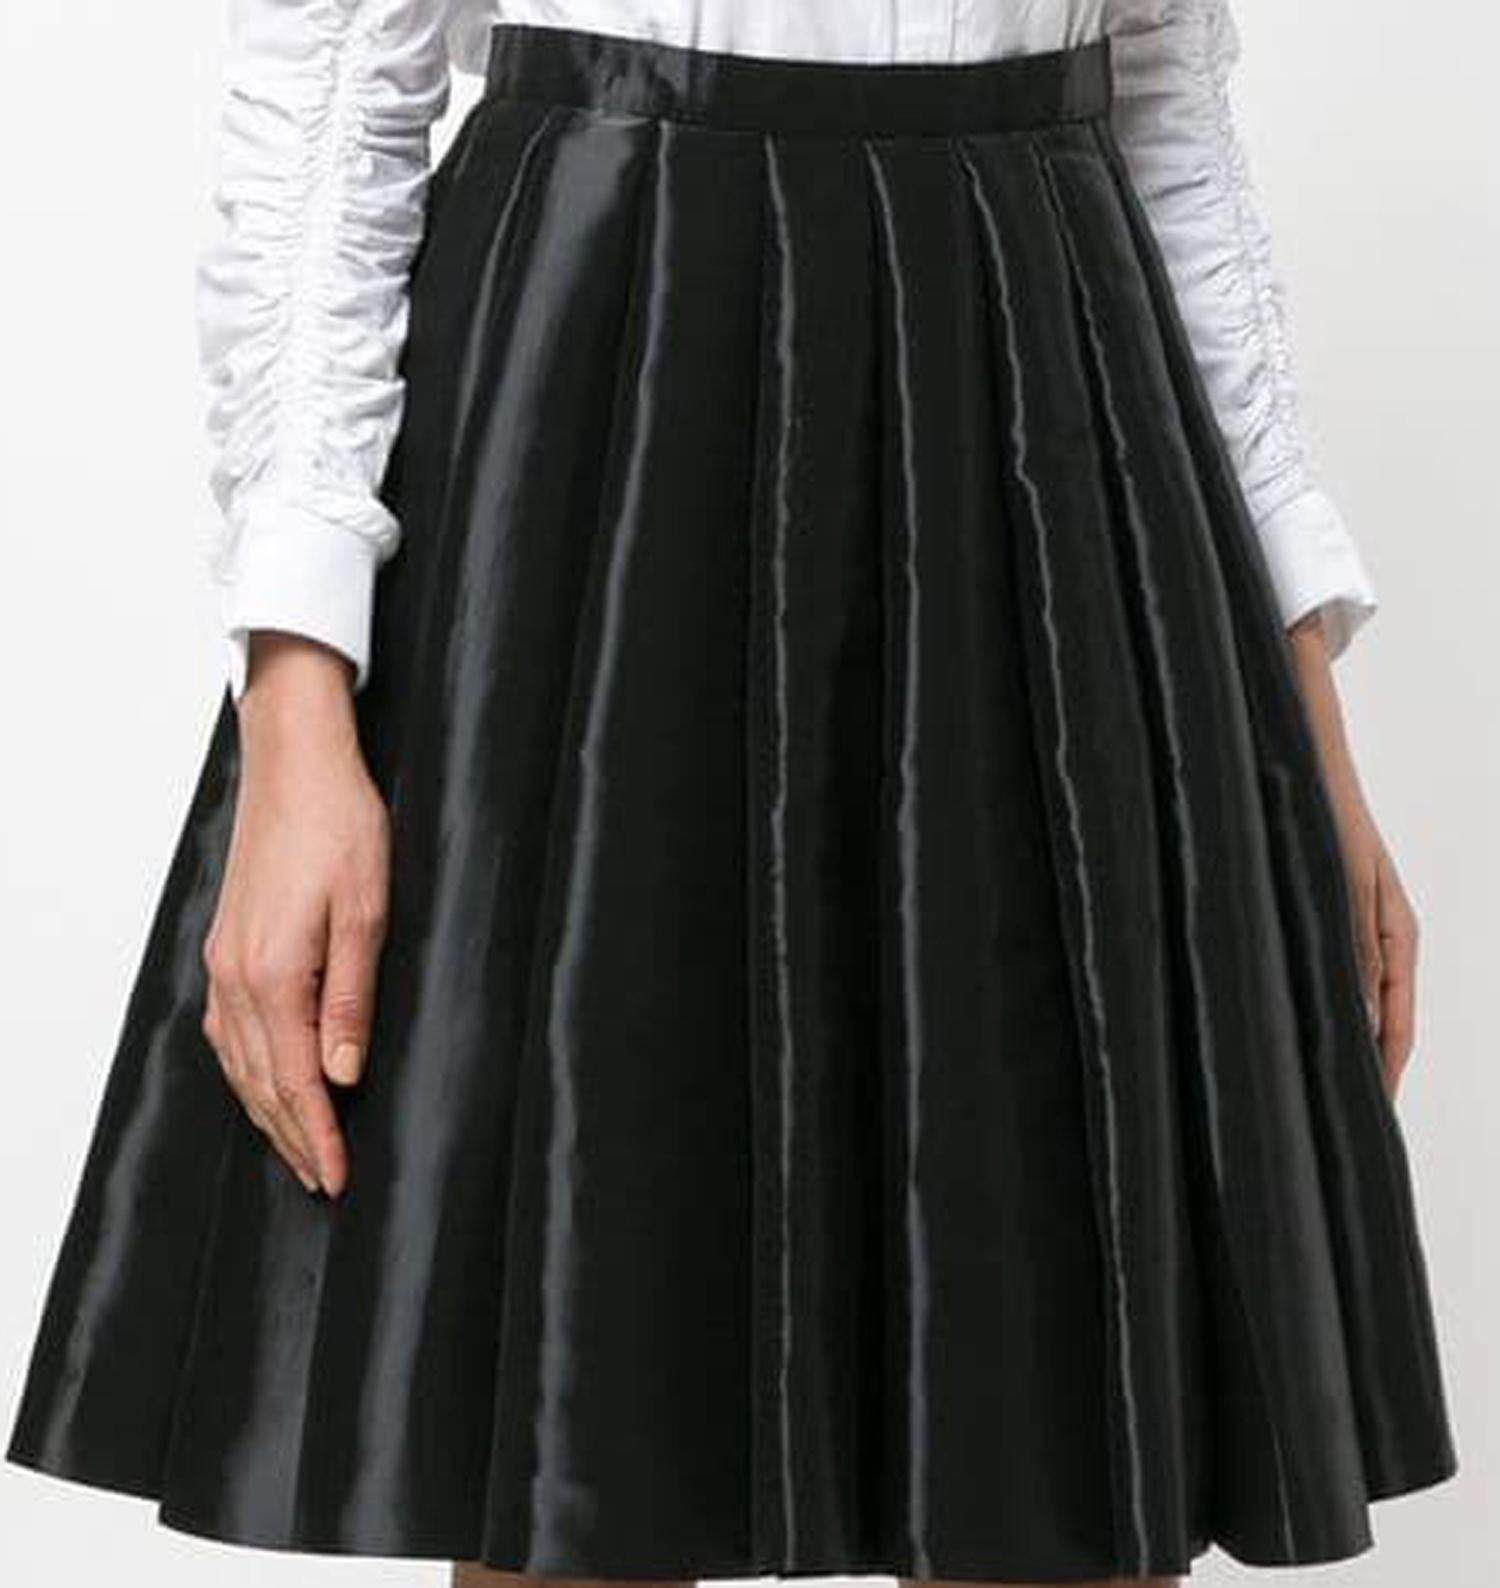 Junya Watanabe Comme des Garcons black draped flared skirt featuring a high rise, a waistband, a short length, a straight hem, a draped design and a side invisible zip fastening. See Catwalk Photo.
In excellent vintage condition. Made in